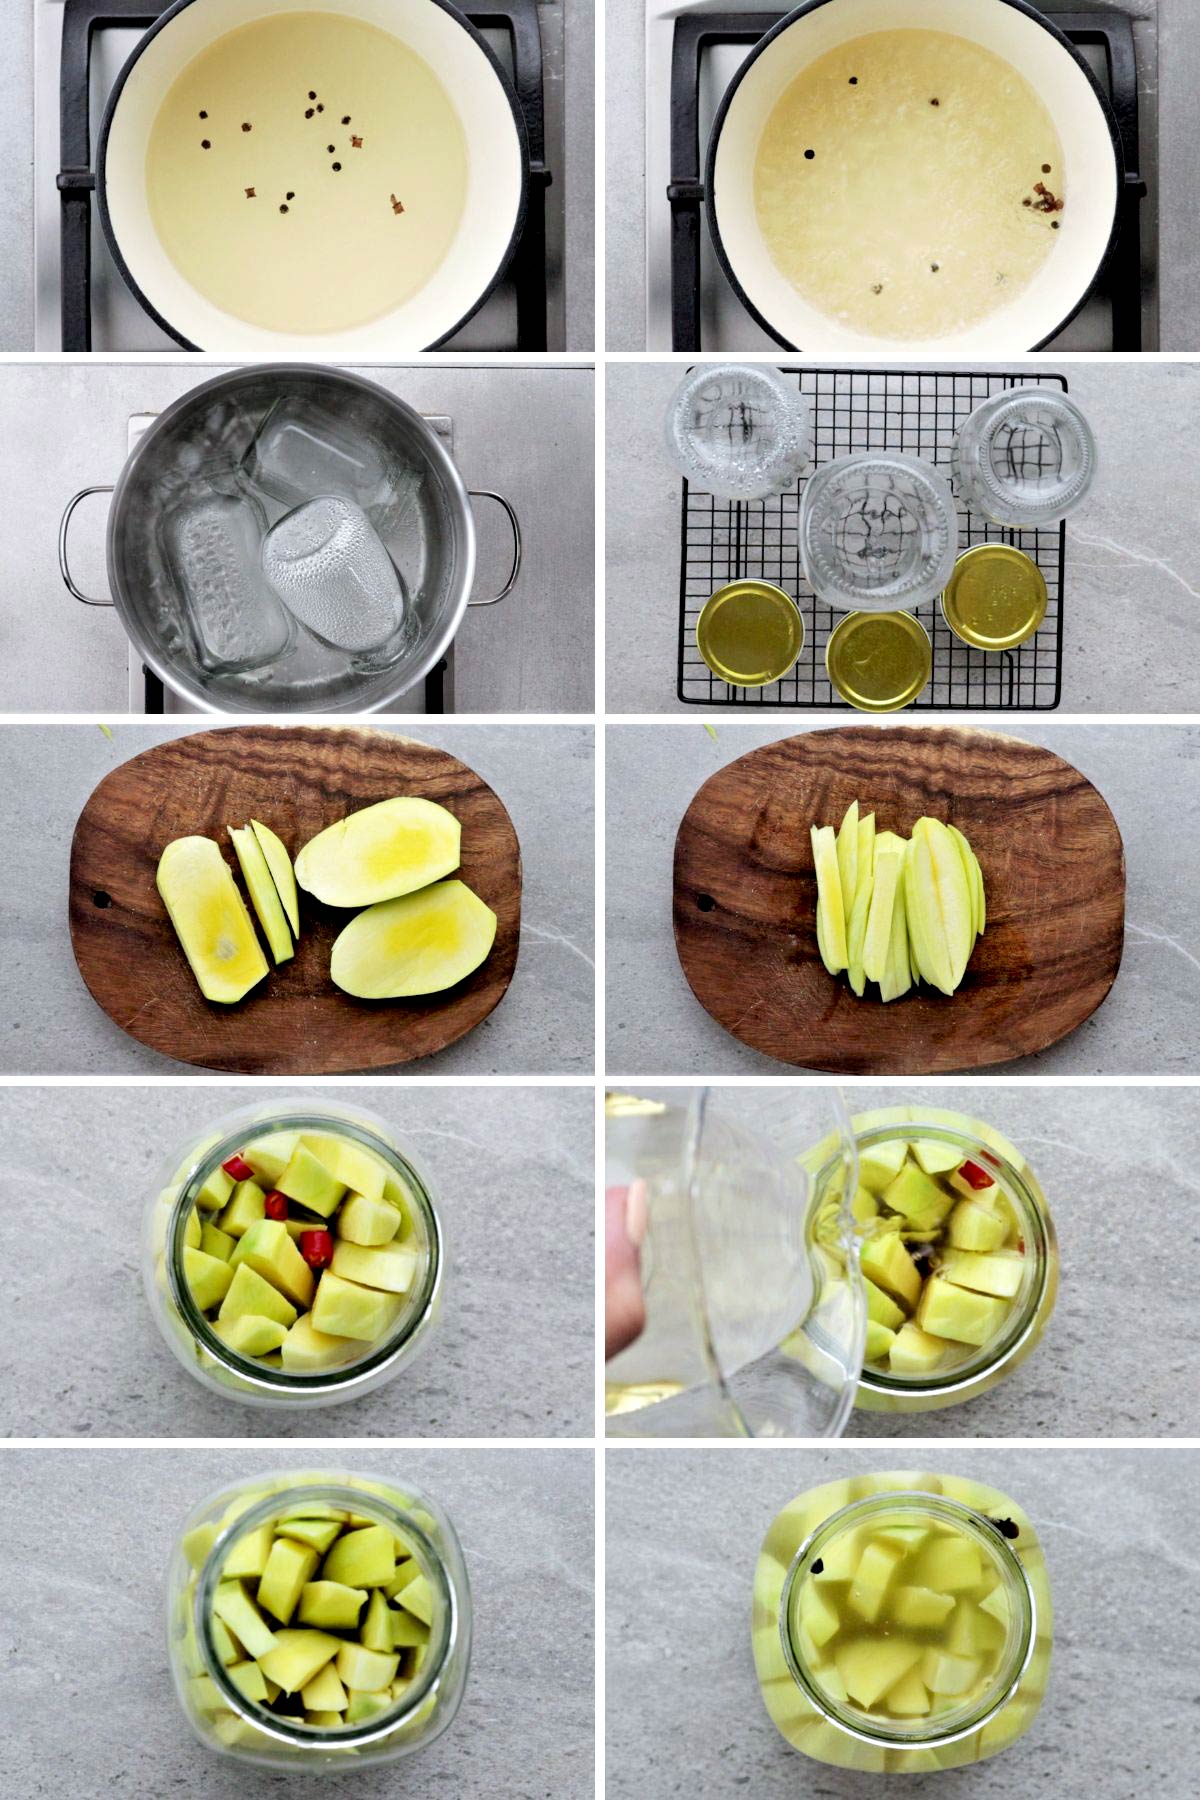 Steps on how to pickle mangoes.